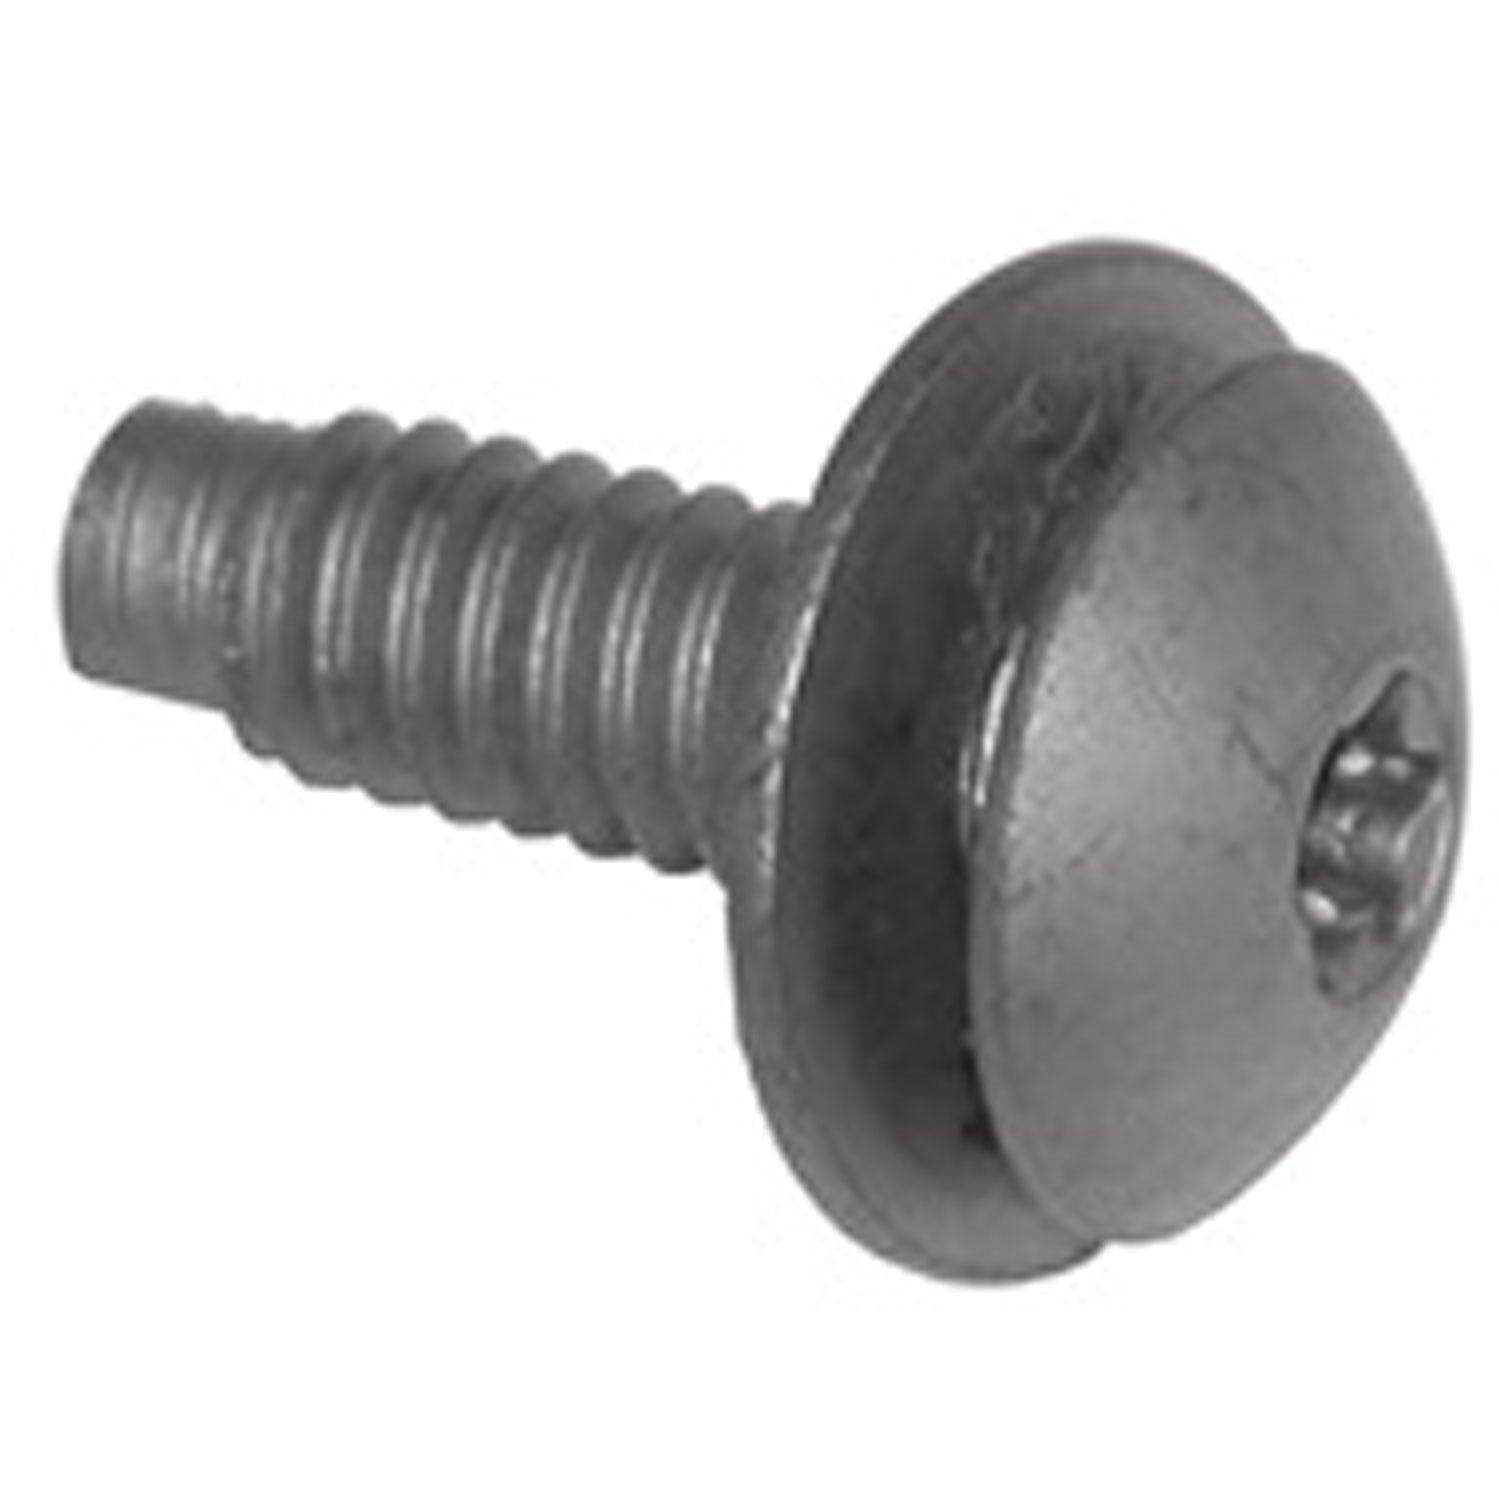 This Torx head bolt from Omix-ADA secures the dash panel to the body in 72-86 Jeep CJ models and 87-95 YJ Jeep Wrangler.